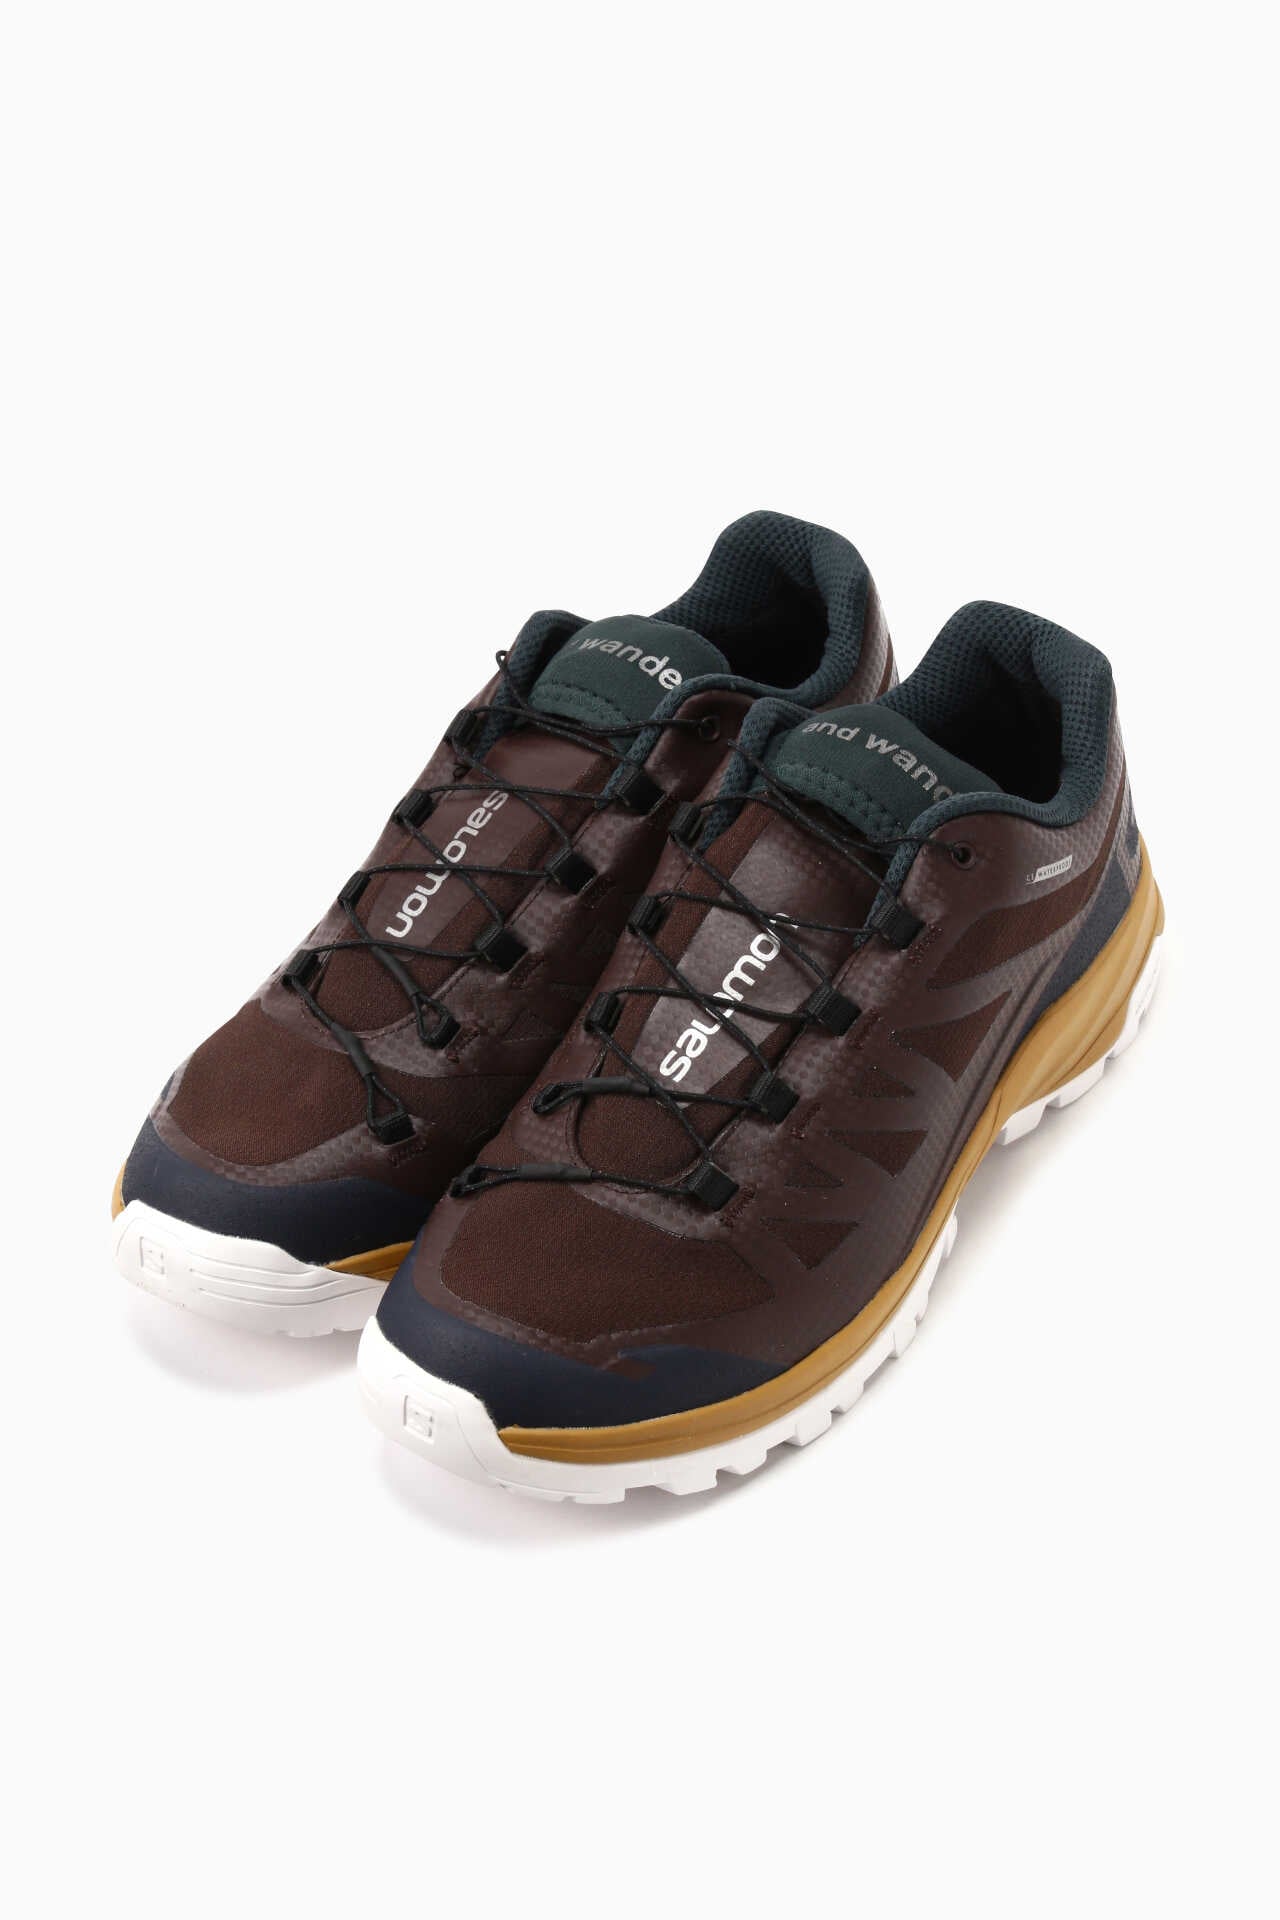 SALOMON OUTpath CSWP for and wander | footwear | and wander ONLINE 